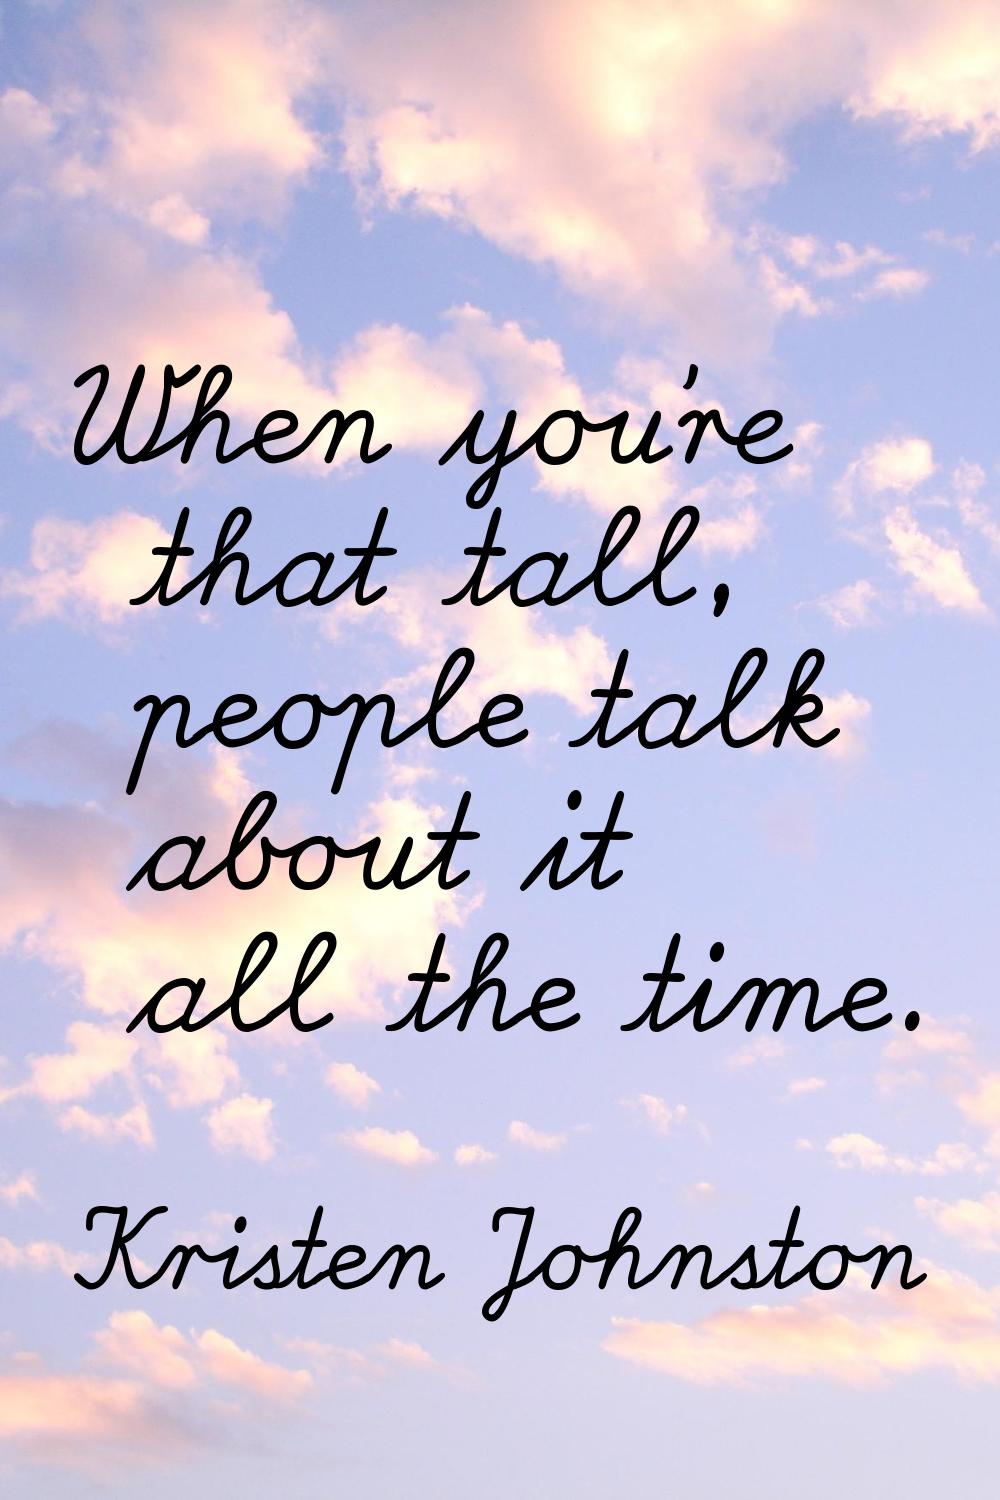 When you're that tall, people talk about it all the time.